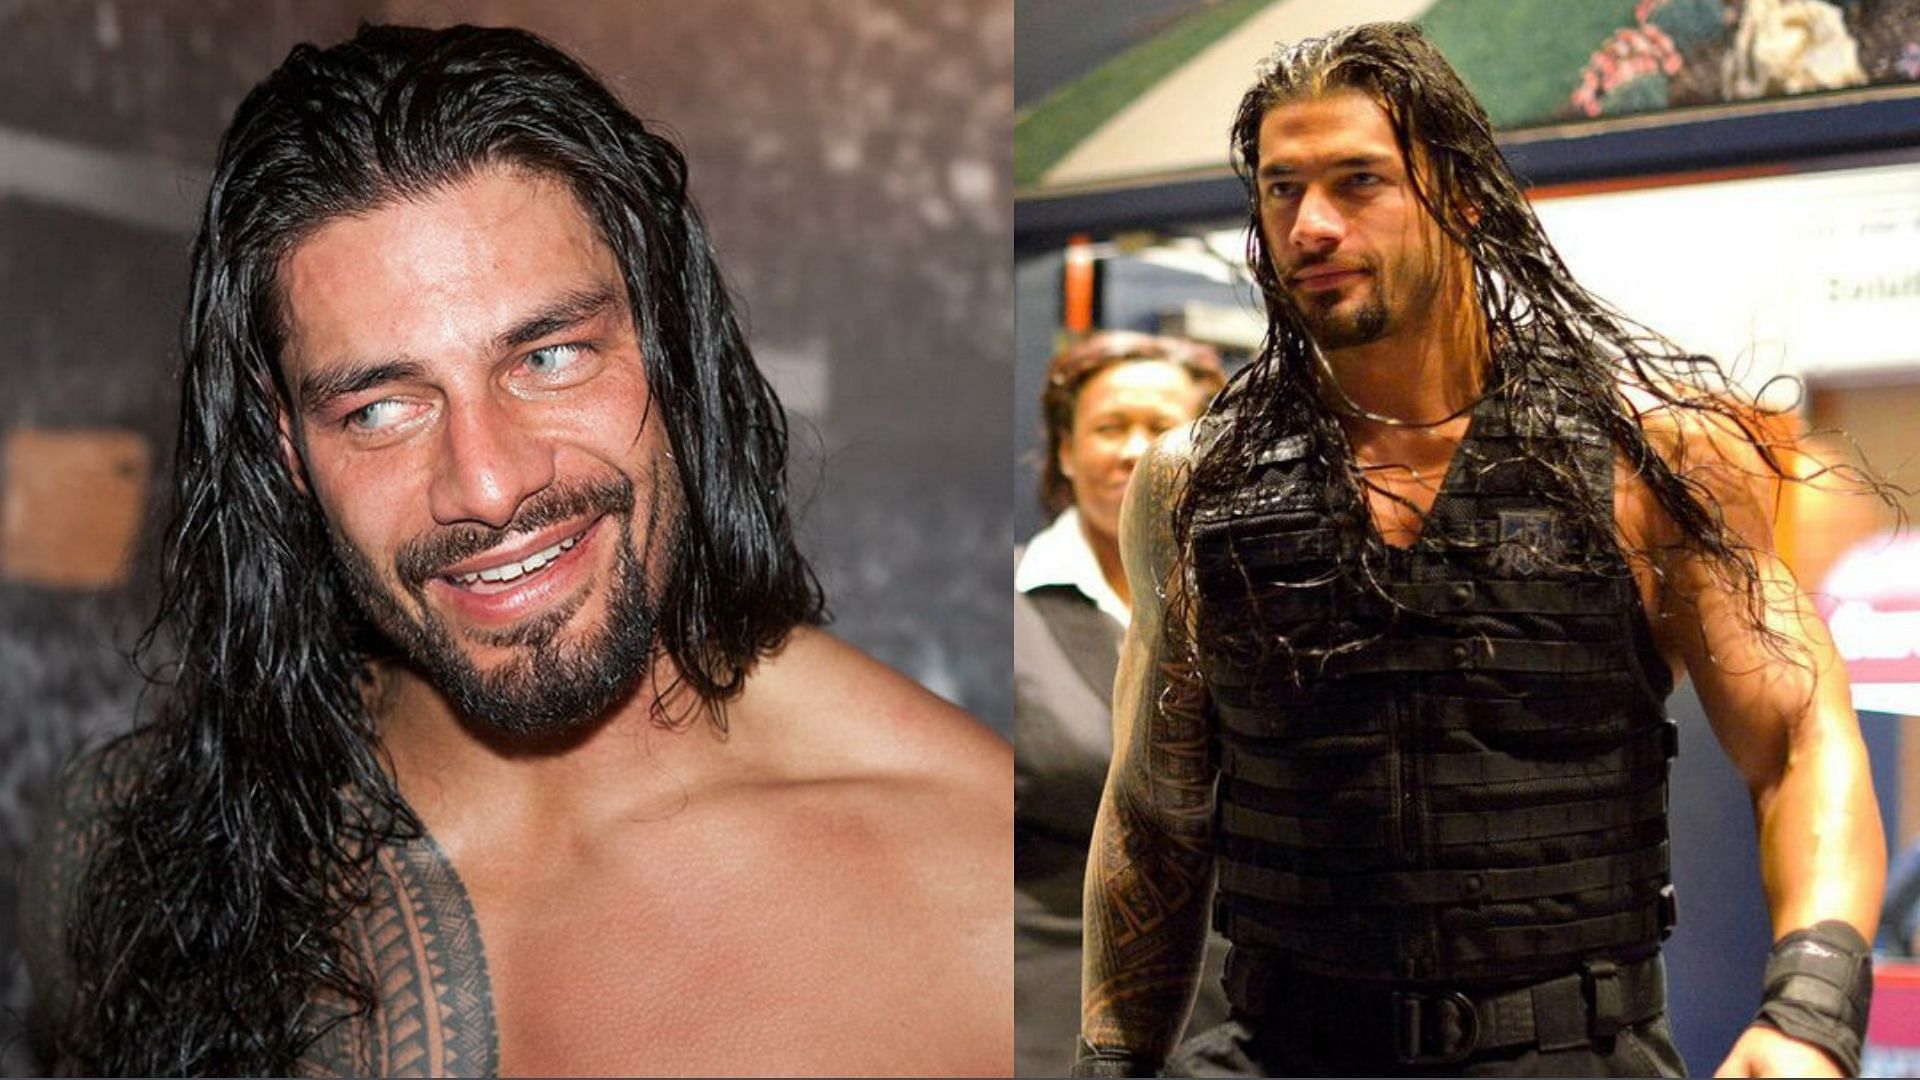 Roman Reigns will face Cody Rhodes at WrestleMania